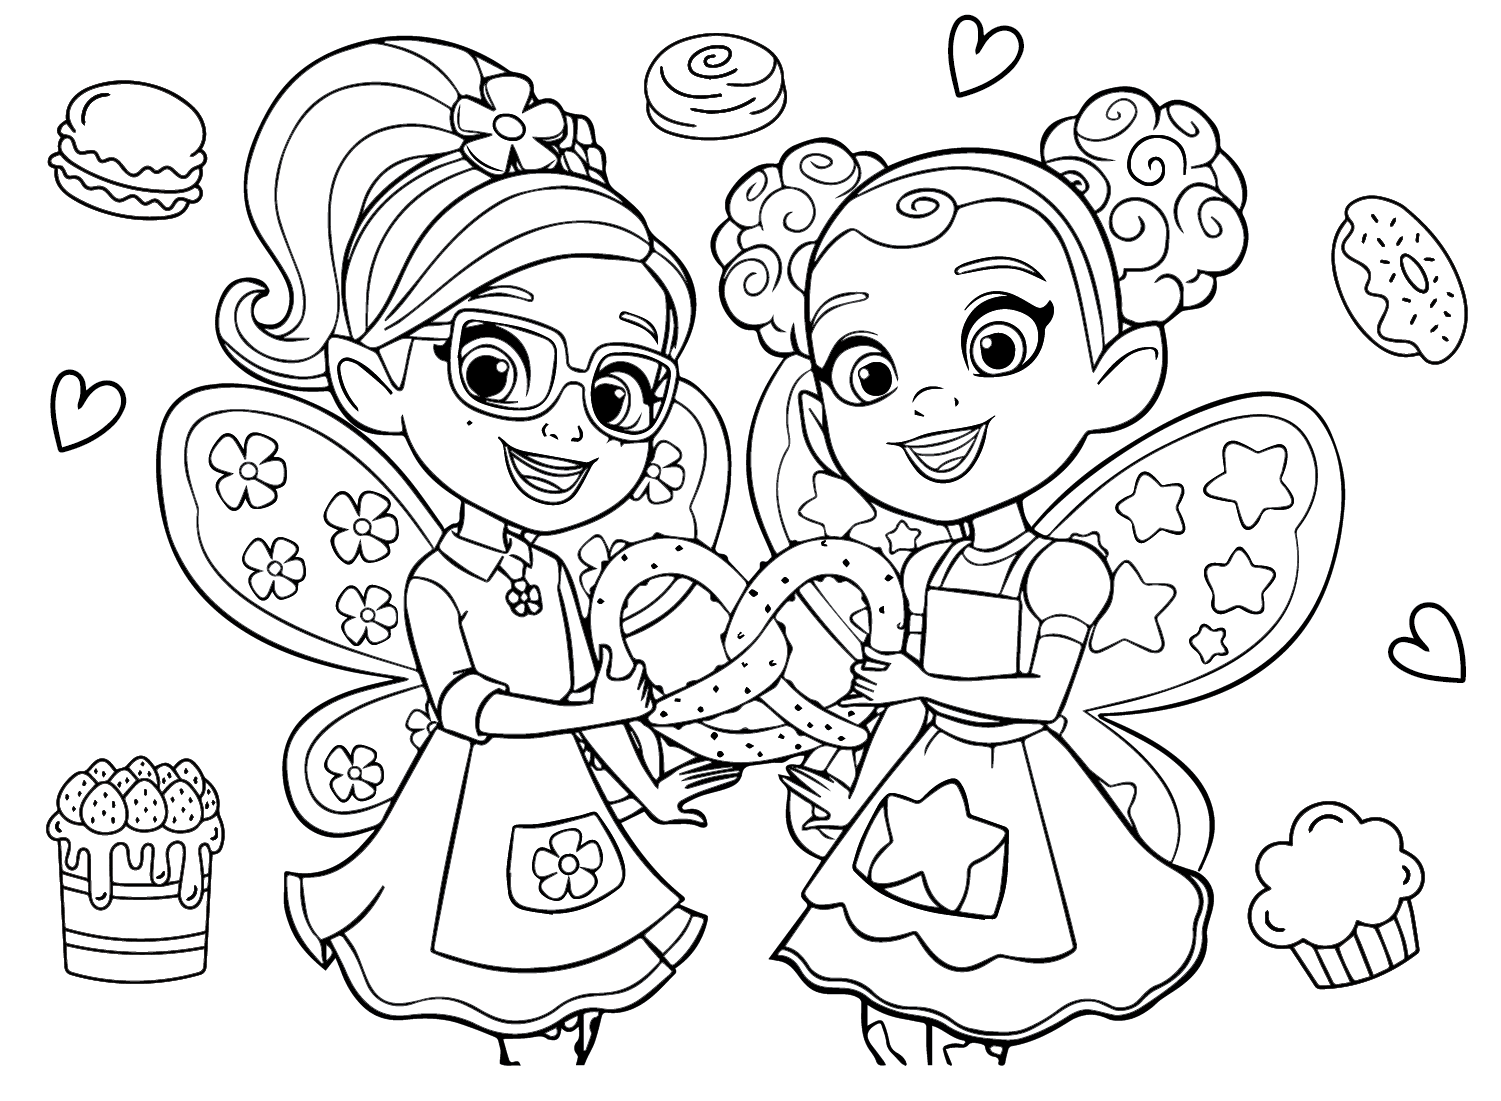 Dazzle And Poppy from Butterbean’s Cafe